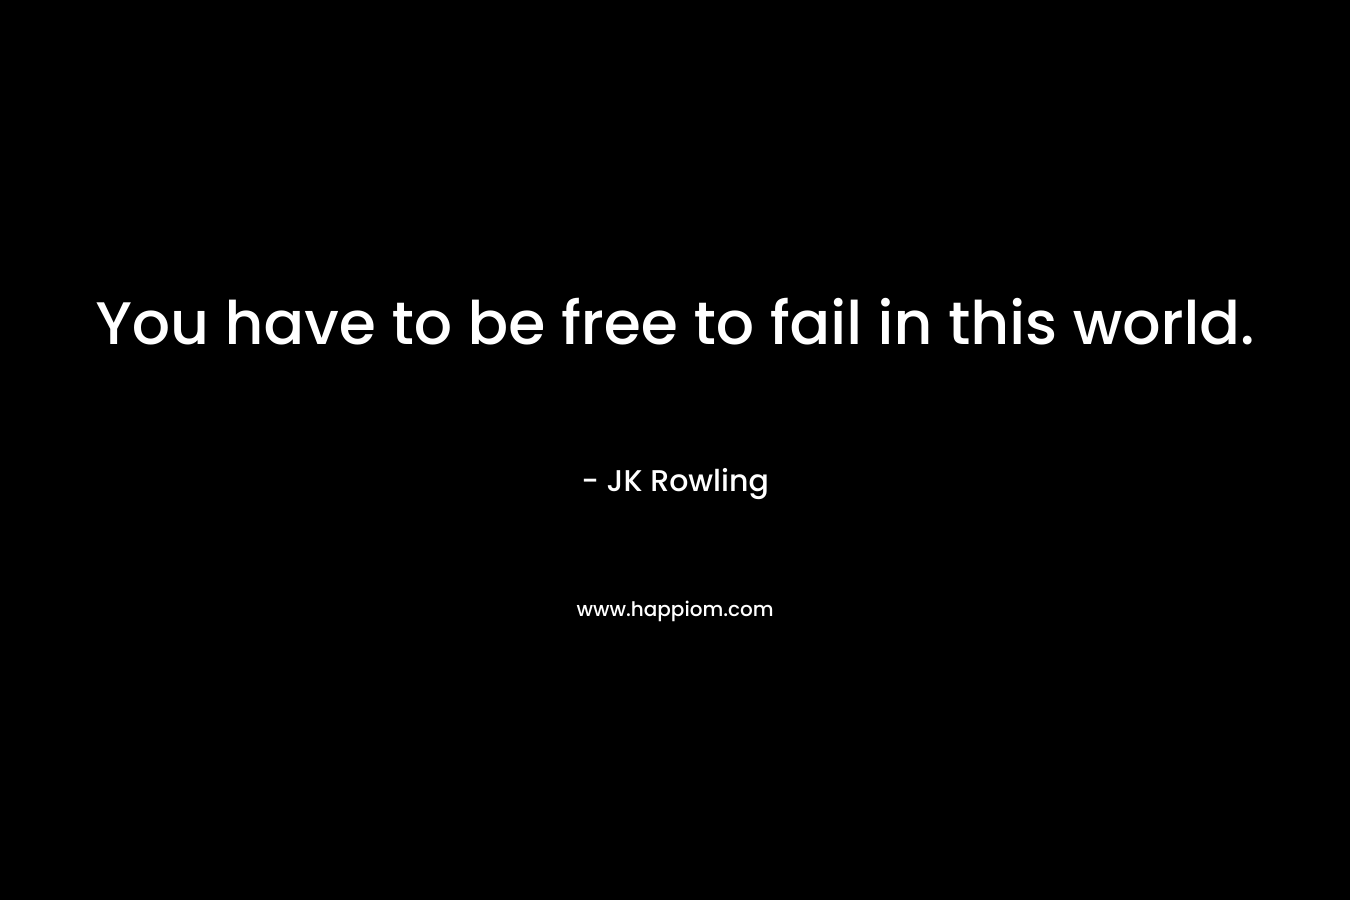 You have to be free to fail in this world.